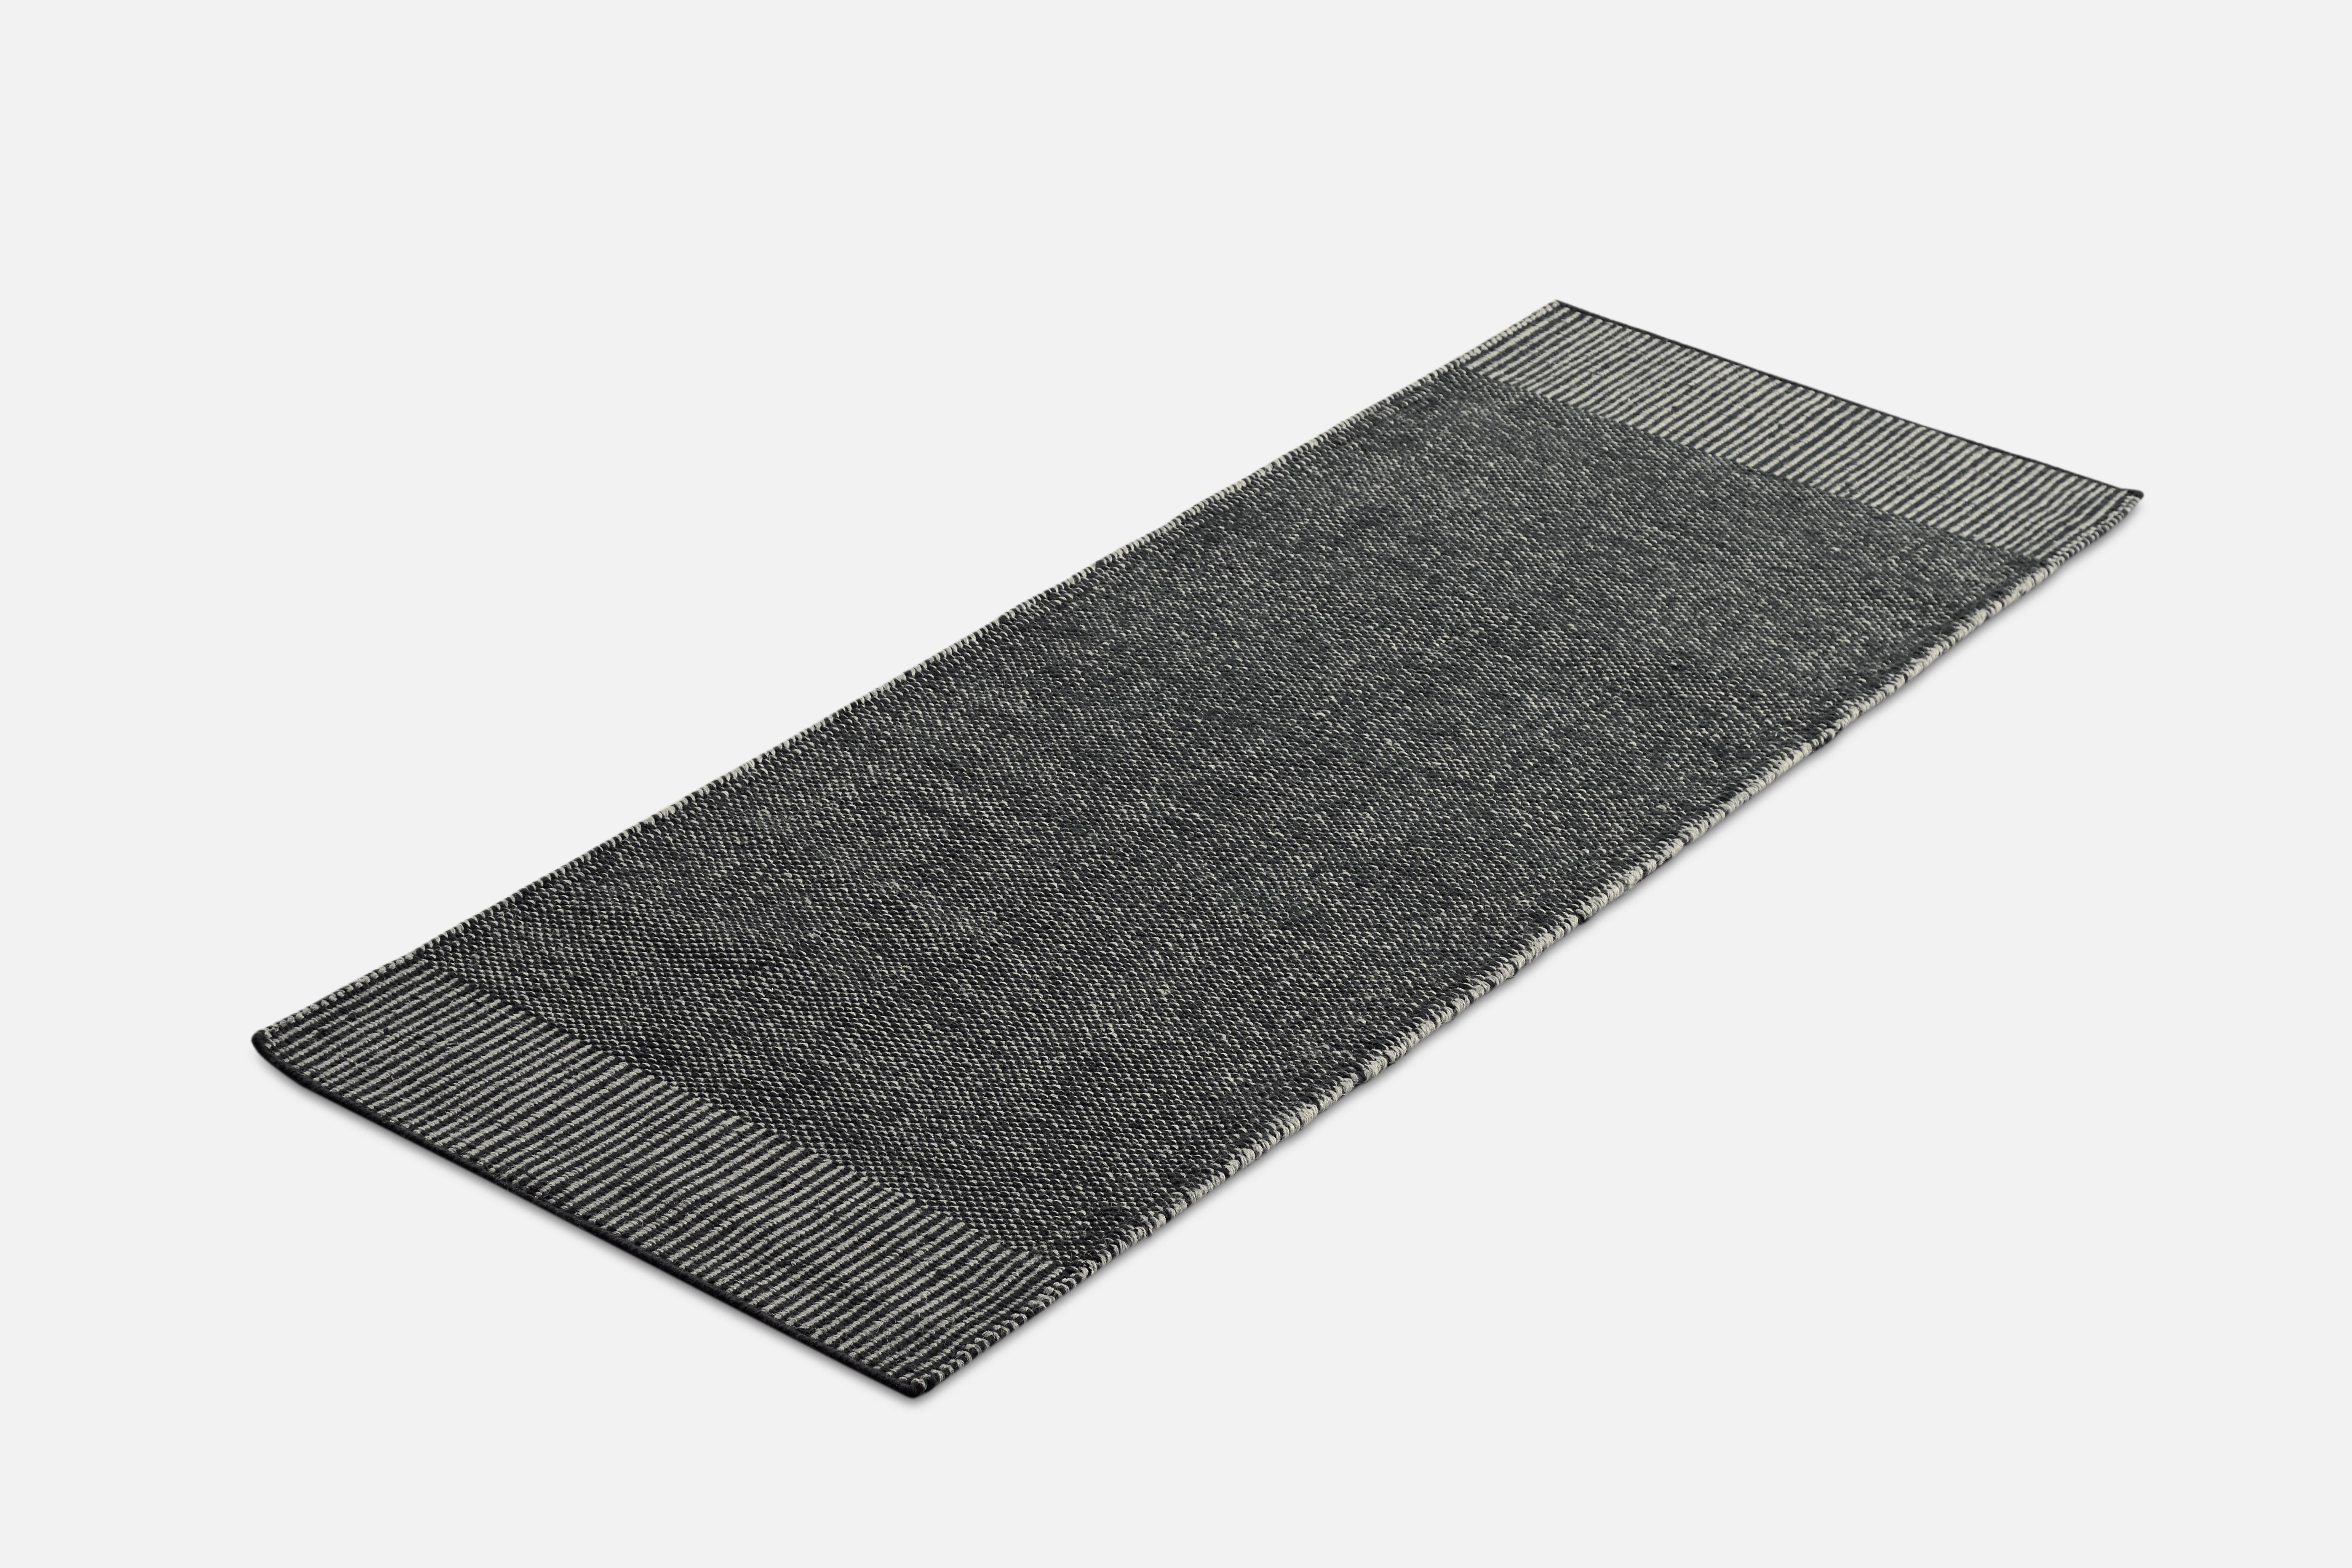 Grey Rombo runner rug by Studio MLR
Materials: 65% wool, 35% jute.
Dimensions: W 75 x L 200 cm
Available in 3 sizes: W90 x L140, W170 x L240, W75 x L200 cm.
Available in grey, moss green and rust.

Rombo is characterised by the materials used